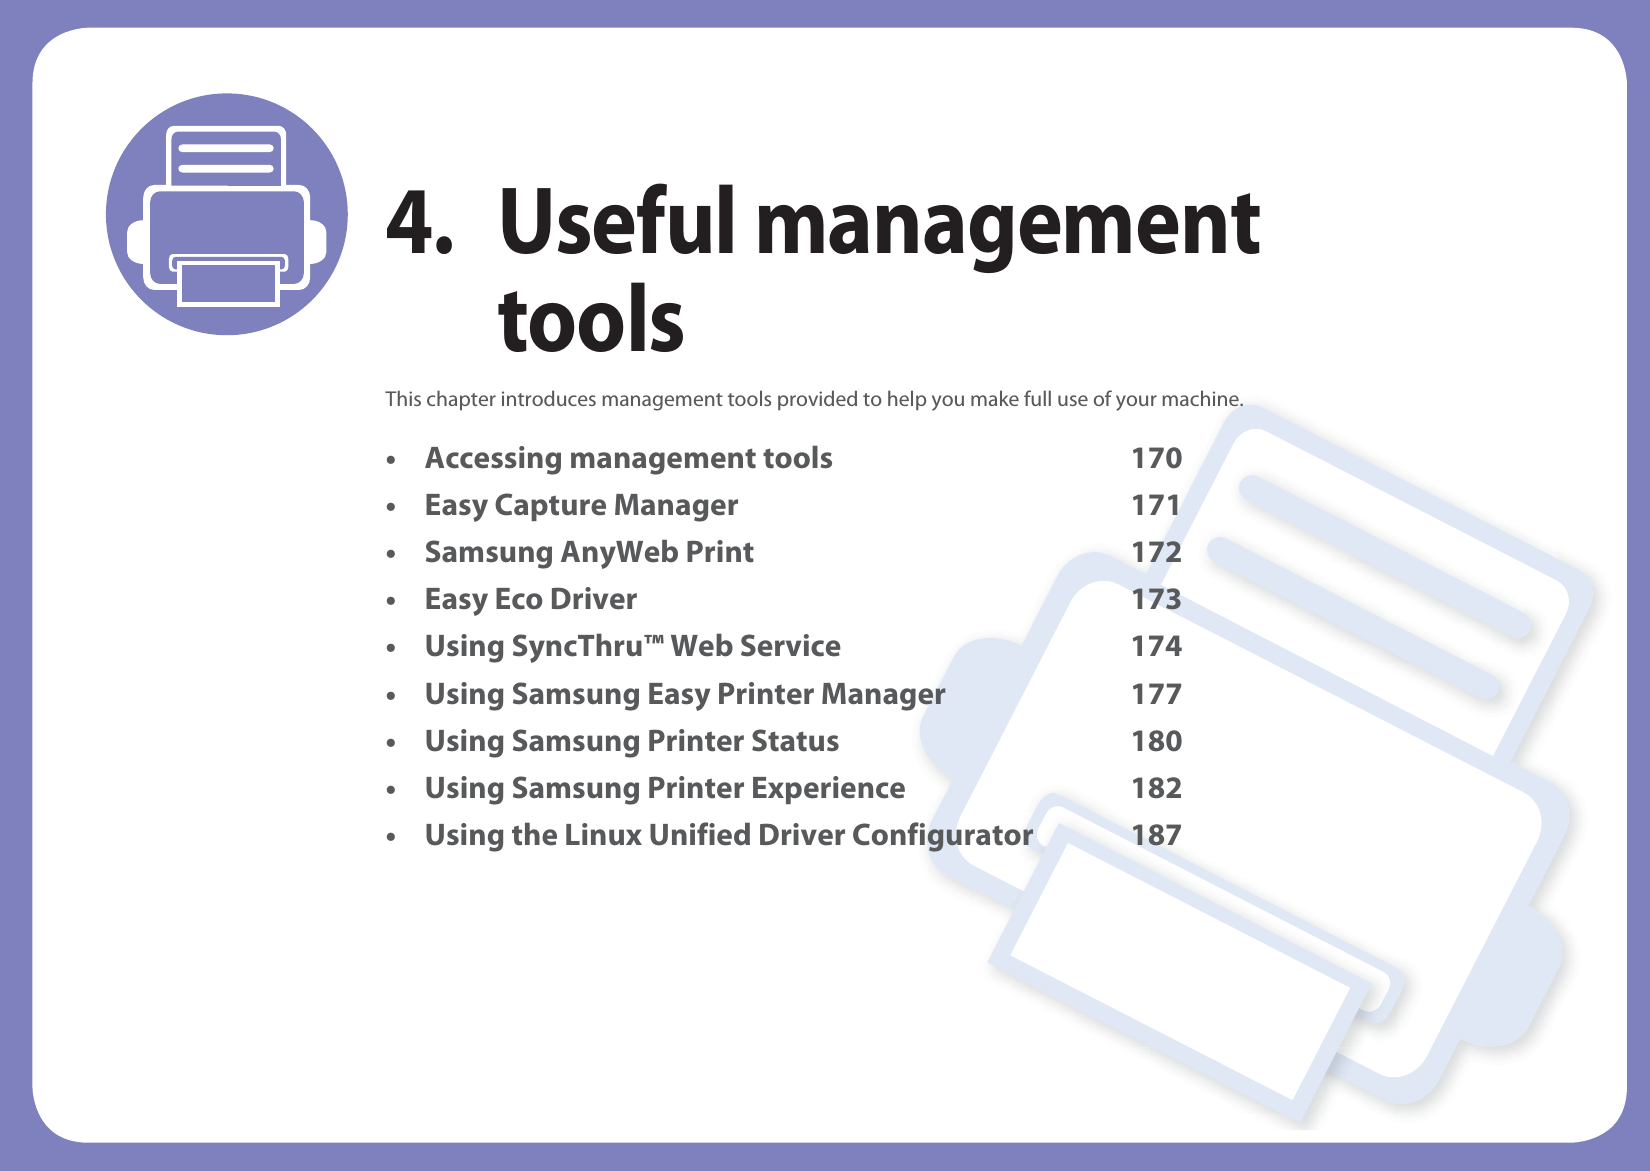 4. Useful management toolsThis chapter introduces management tools provided to help you make full use of your machine. • Accessing management tools 170• Easy Capture Manager 171• Samsung AnyWeb Print 172• Easy Eco Driver 173 • Using SyncThru™ Web Service 174• Using Samsung Easy Printer Manager 177• Using Samsung Printer Status 180• Using Samsung Printer Experience 182• Using the Linux Unified Driver Configurator 187